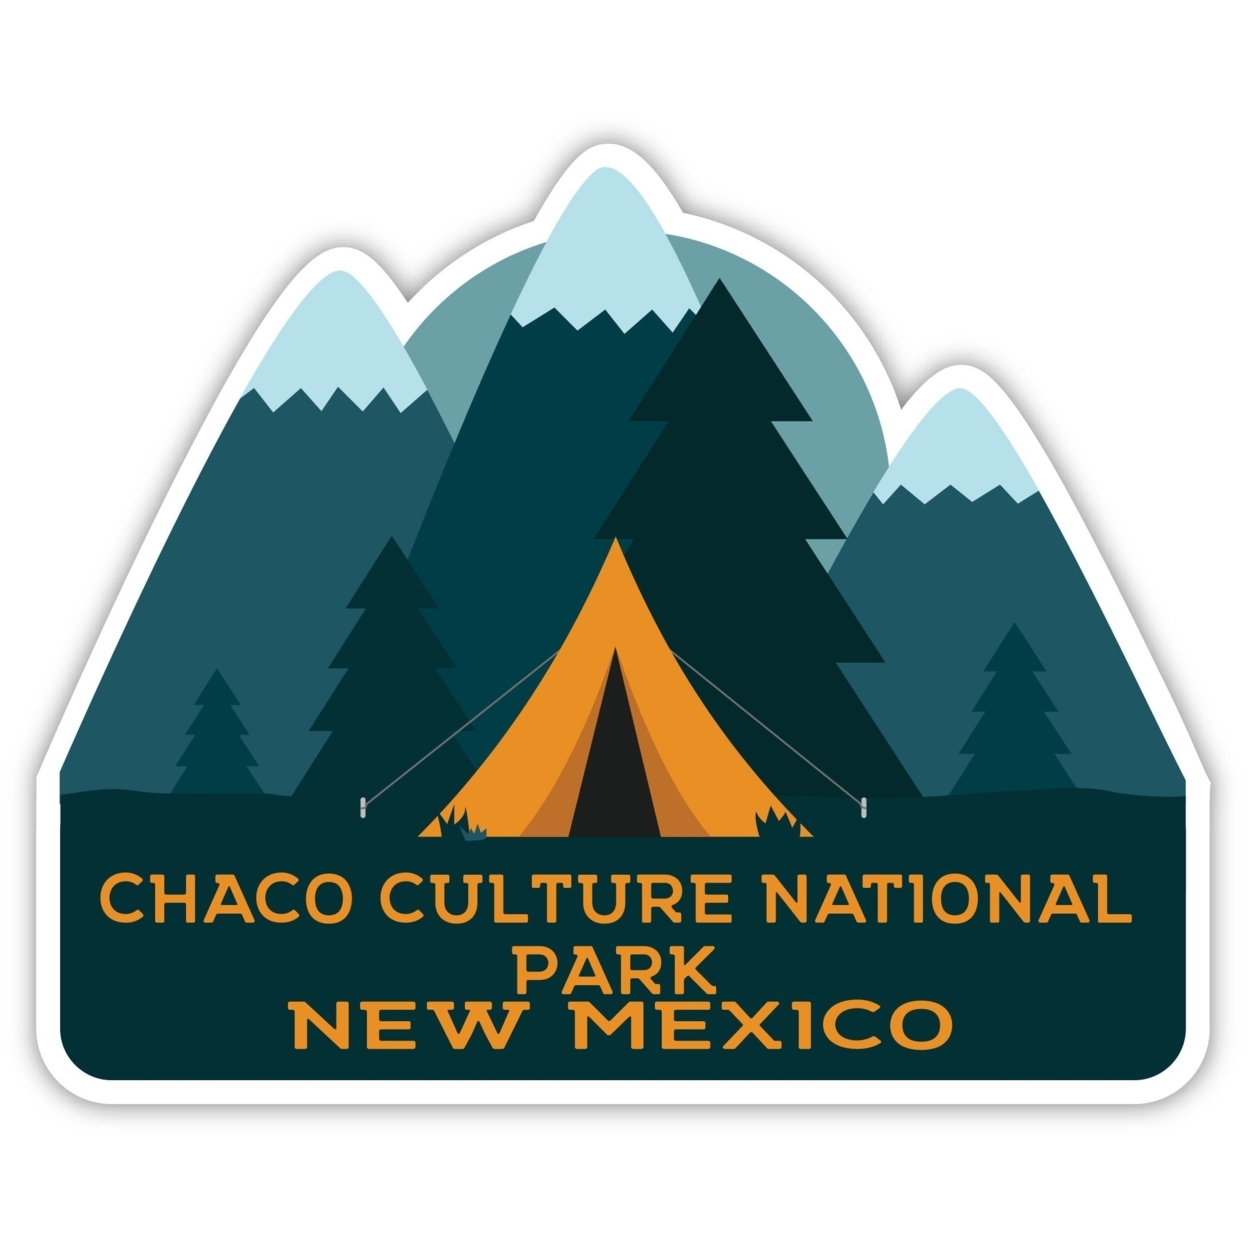 Chaco Culture National Park New Mexico Souvenir Decorative Stickers (Choose Theme And Size) - 4-Pack, 6-Inch, Tent